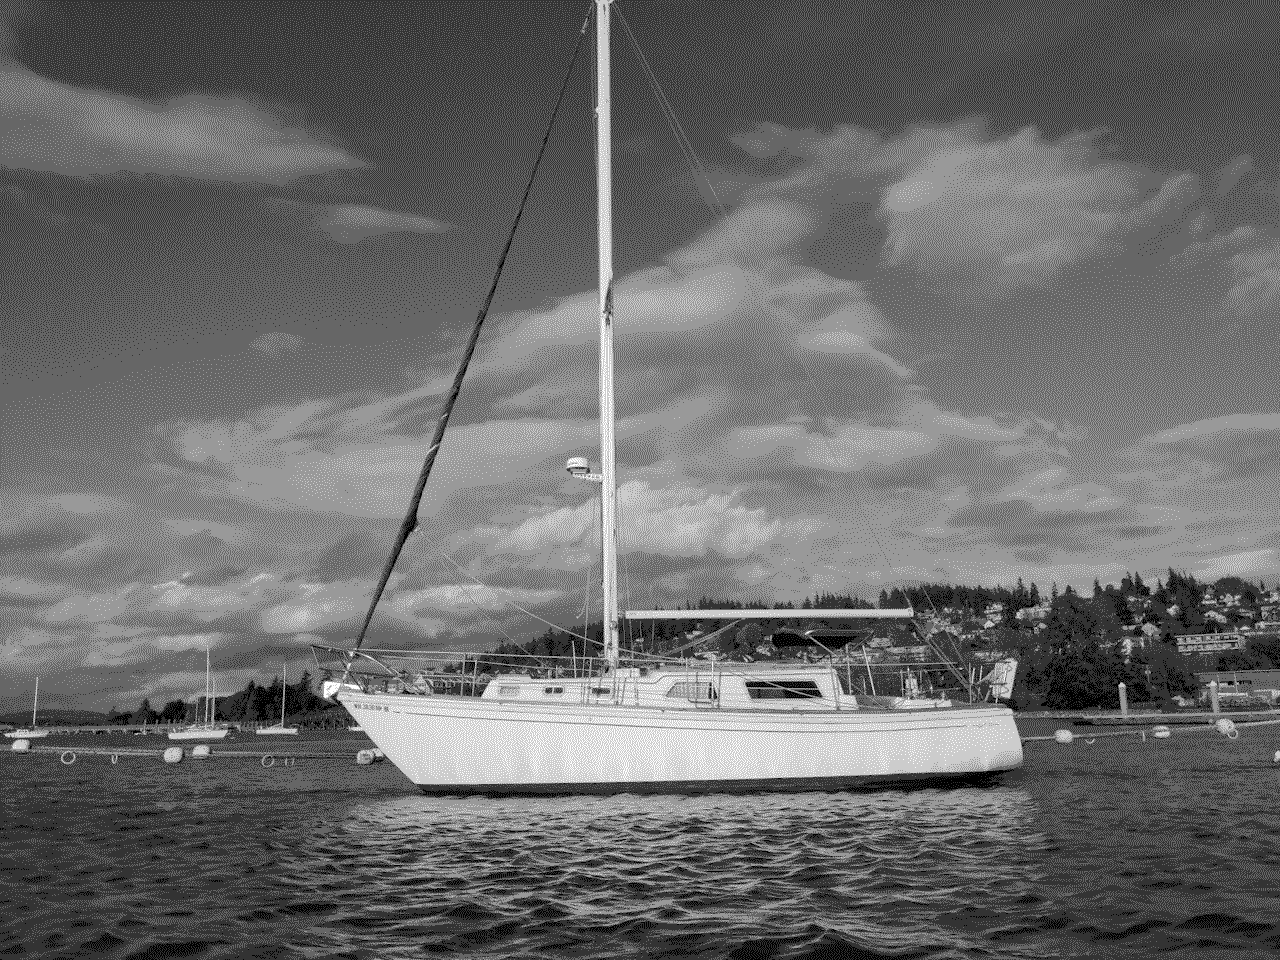 Cloudy Day, then still named "Cara Mia", on a linear mooring in Bellingham,
WA, September 2021. Mainsail not present as it had recently been shredded in a
violent storm.